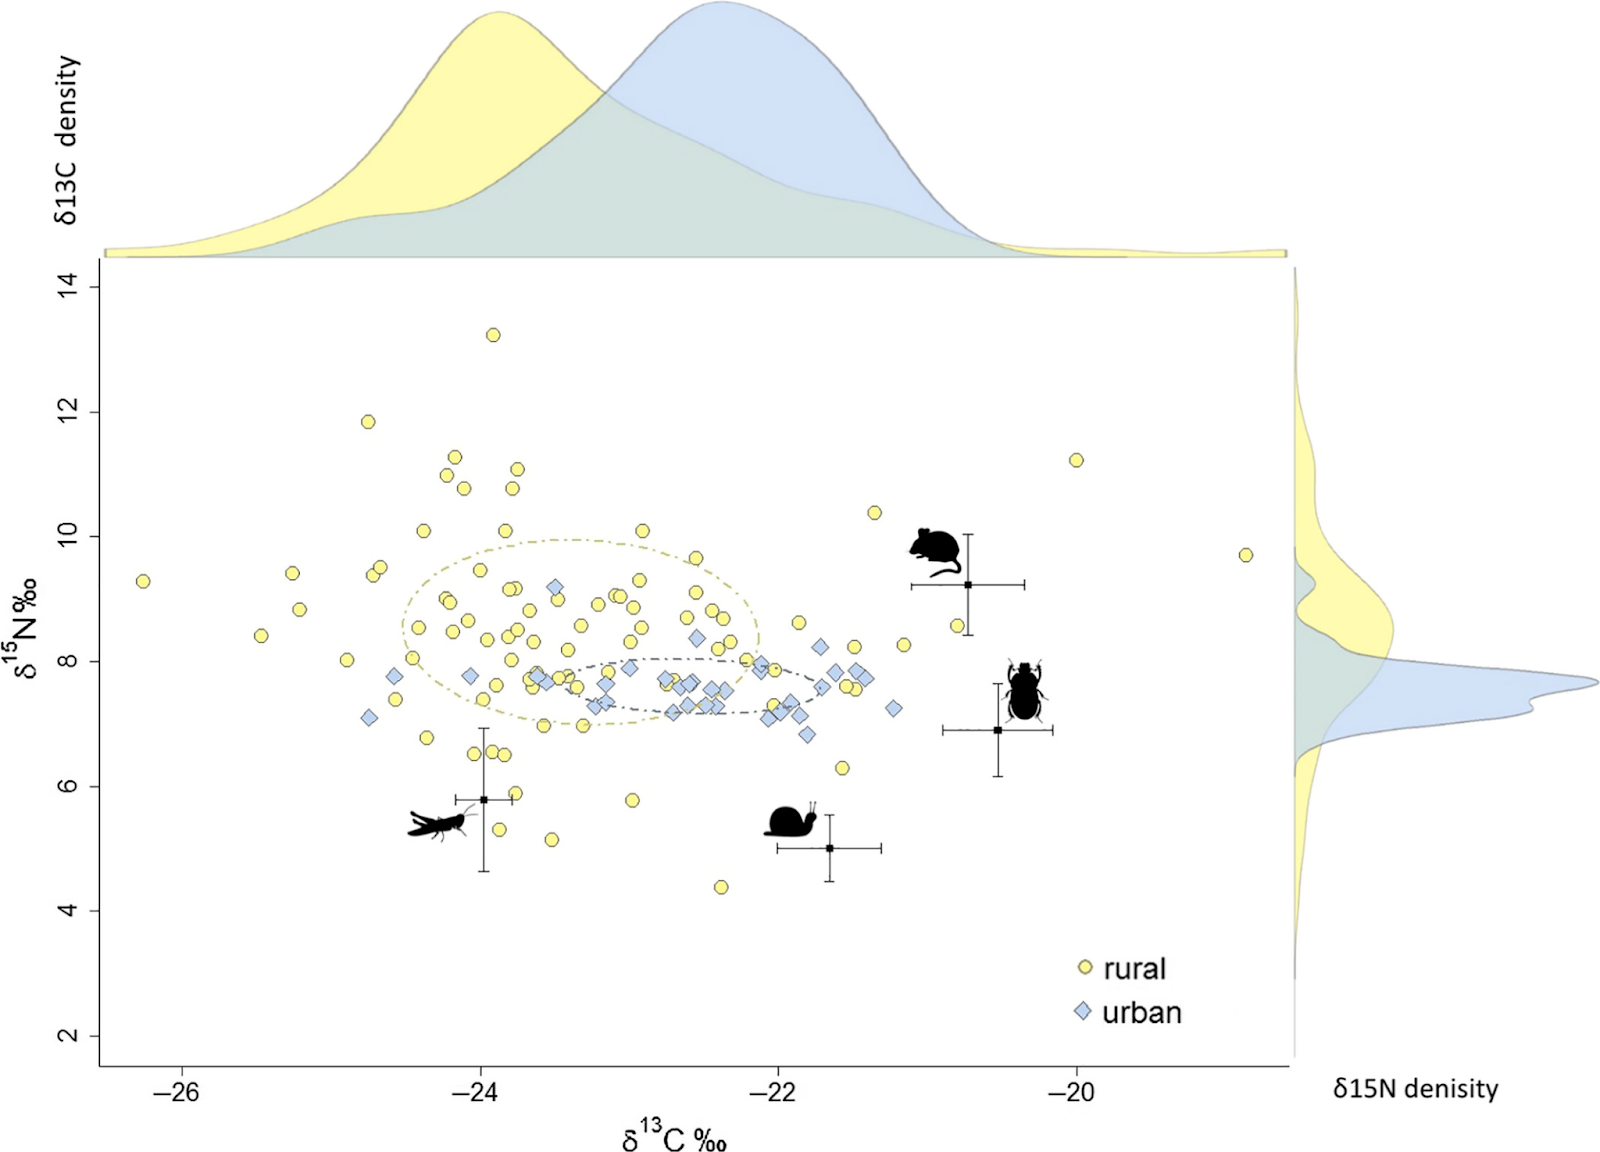 A scatter plot with Carbon 13 ratios on the x-axis and nitrogen 15 ratios on the y-axis show overlapping urban and rural red fox whisker samples. The four prey taxa are shown at the outskirts of the area where foxes are on the graph. Histograms for each axis show that rural foxes generally have lower Carbon 13 ratios and higher nitrogen 15 ratios.